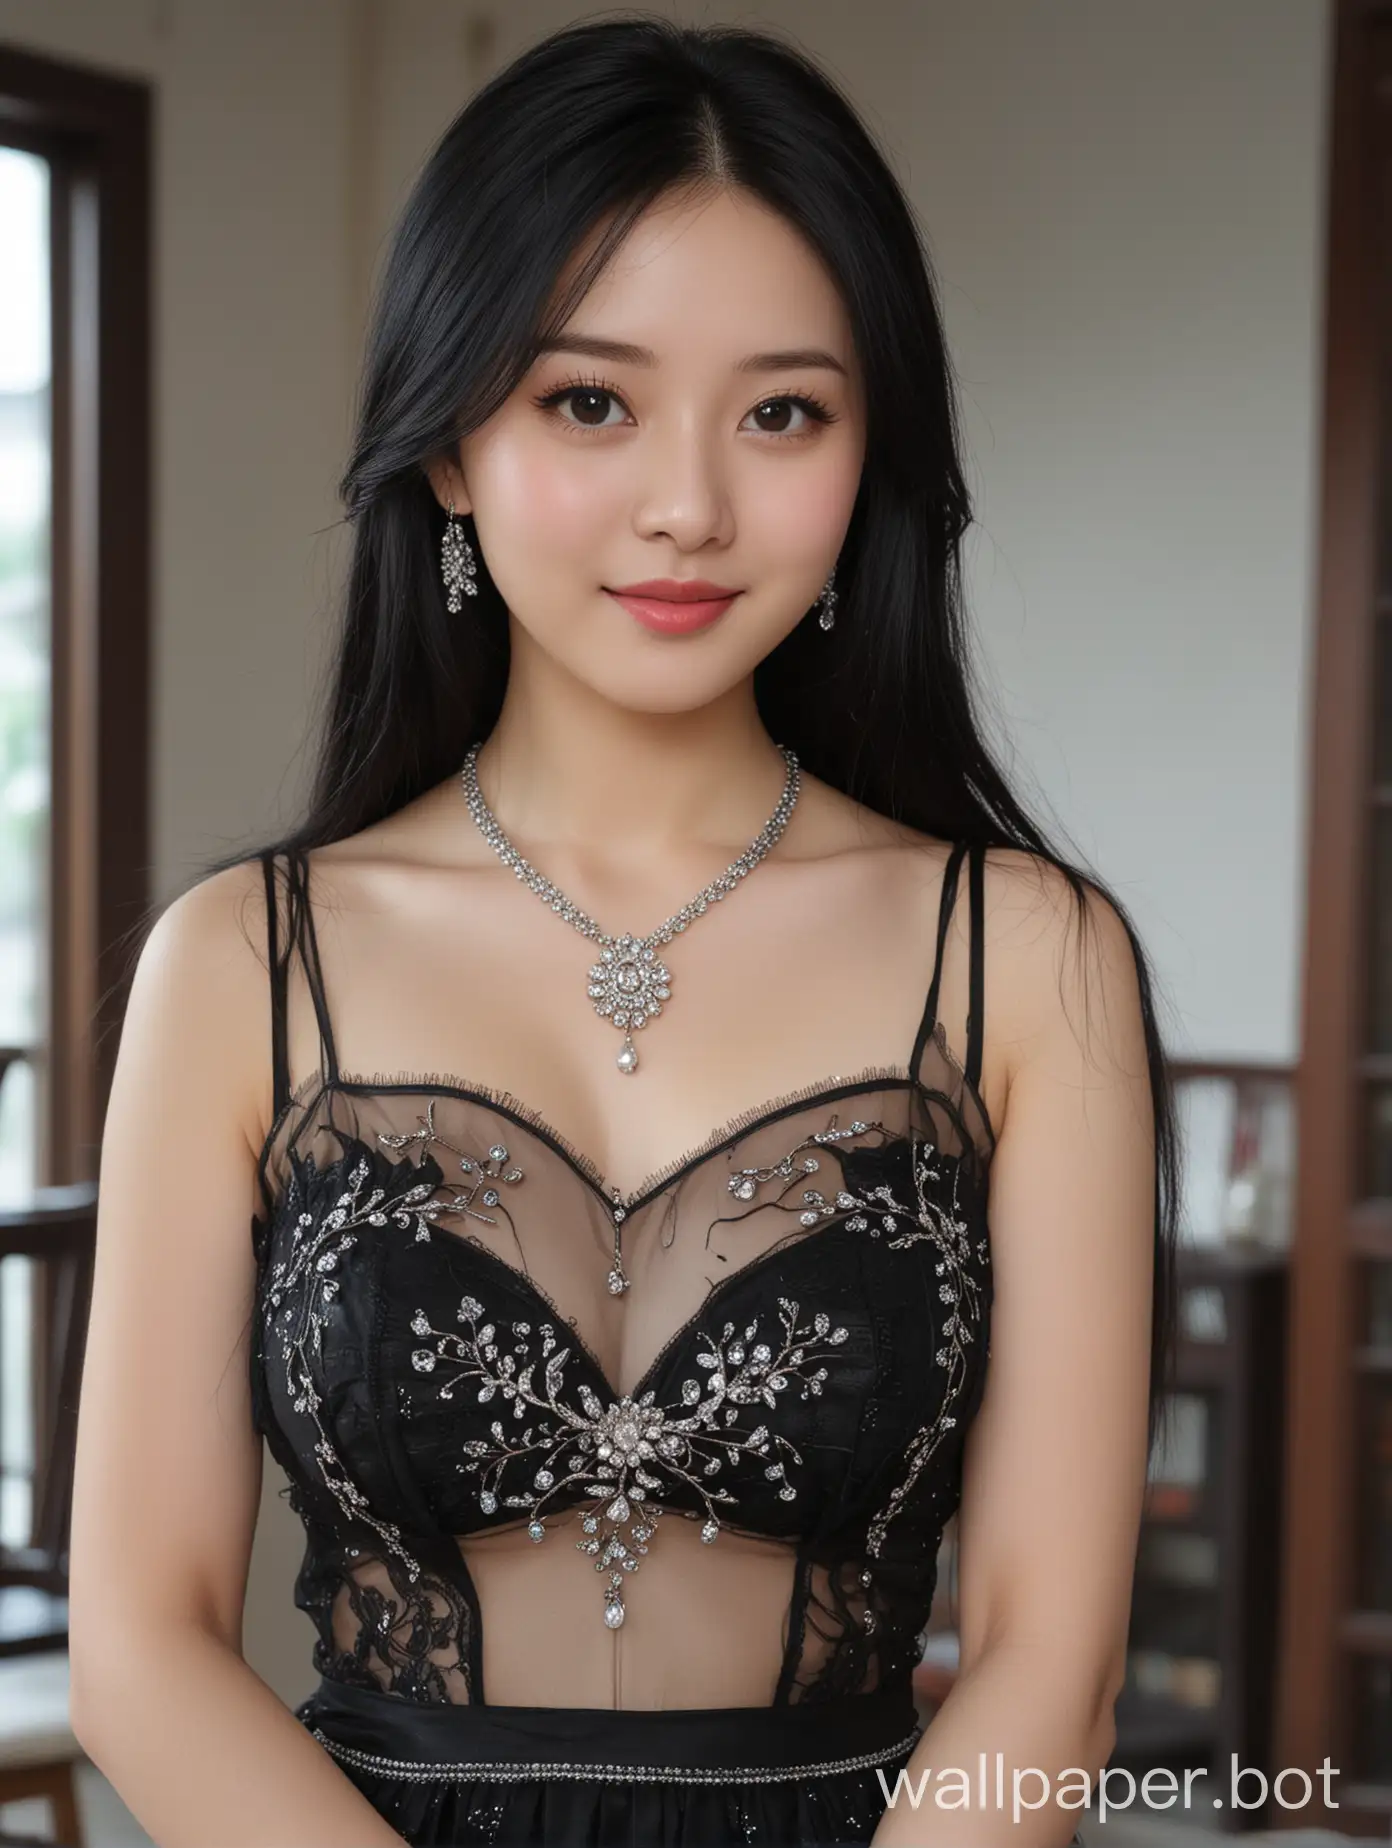 Generate an image of most beautiful (Chongqing Provinces china) actress big tits cute pretty girl 18 years old ,  A-line Dress Transparent  ,  with a fair skin tone and long hair black. She has a round smile face . The background is a modern house interior. The camera shot captures her from head to stomach . She is wearing makeup and has a necklace , jhumka ear ring and bracelet on.